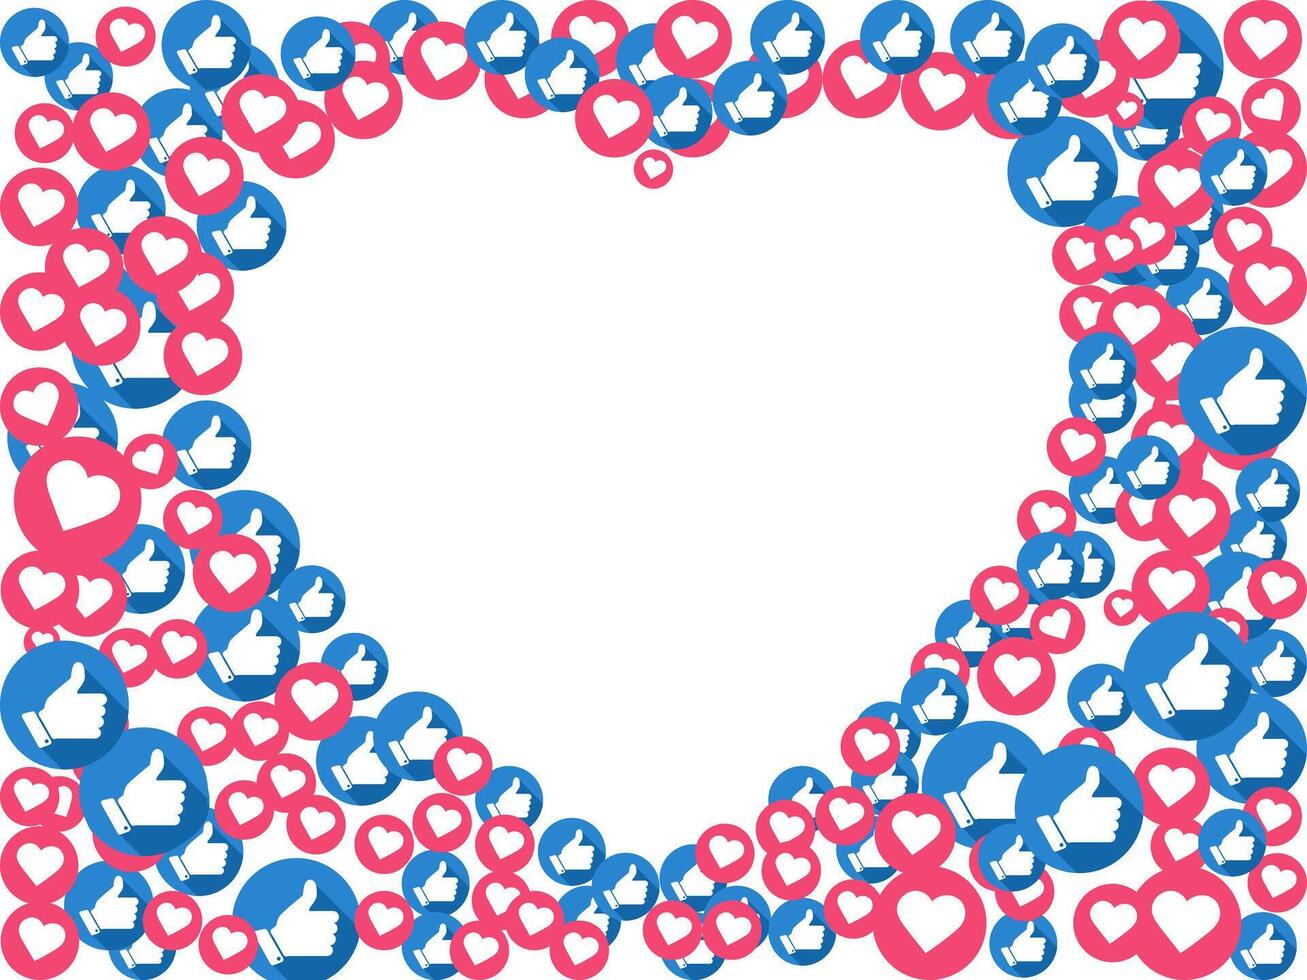 Like and heart icons background. social network concept design vector